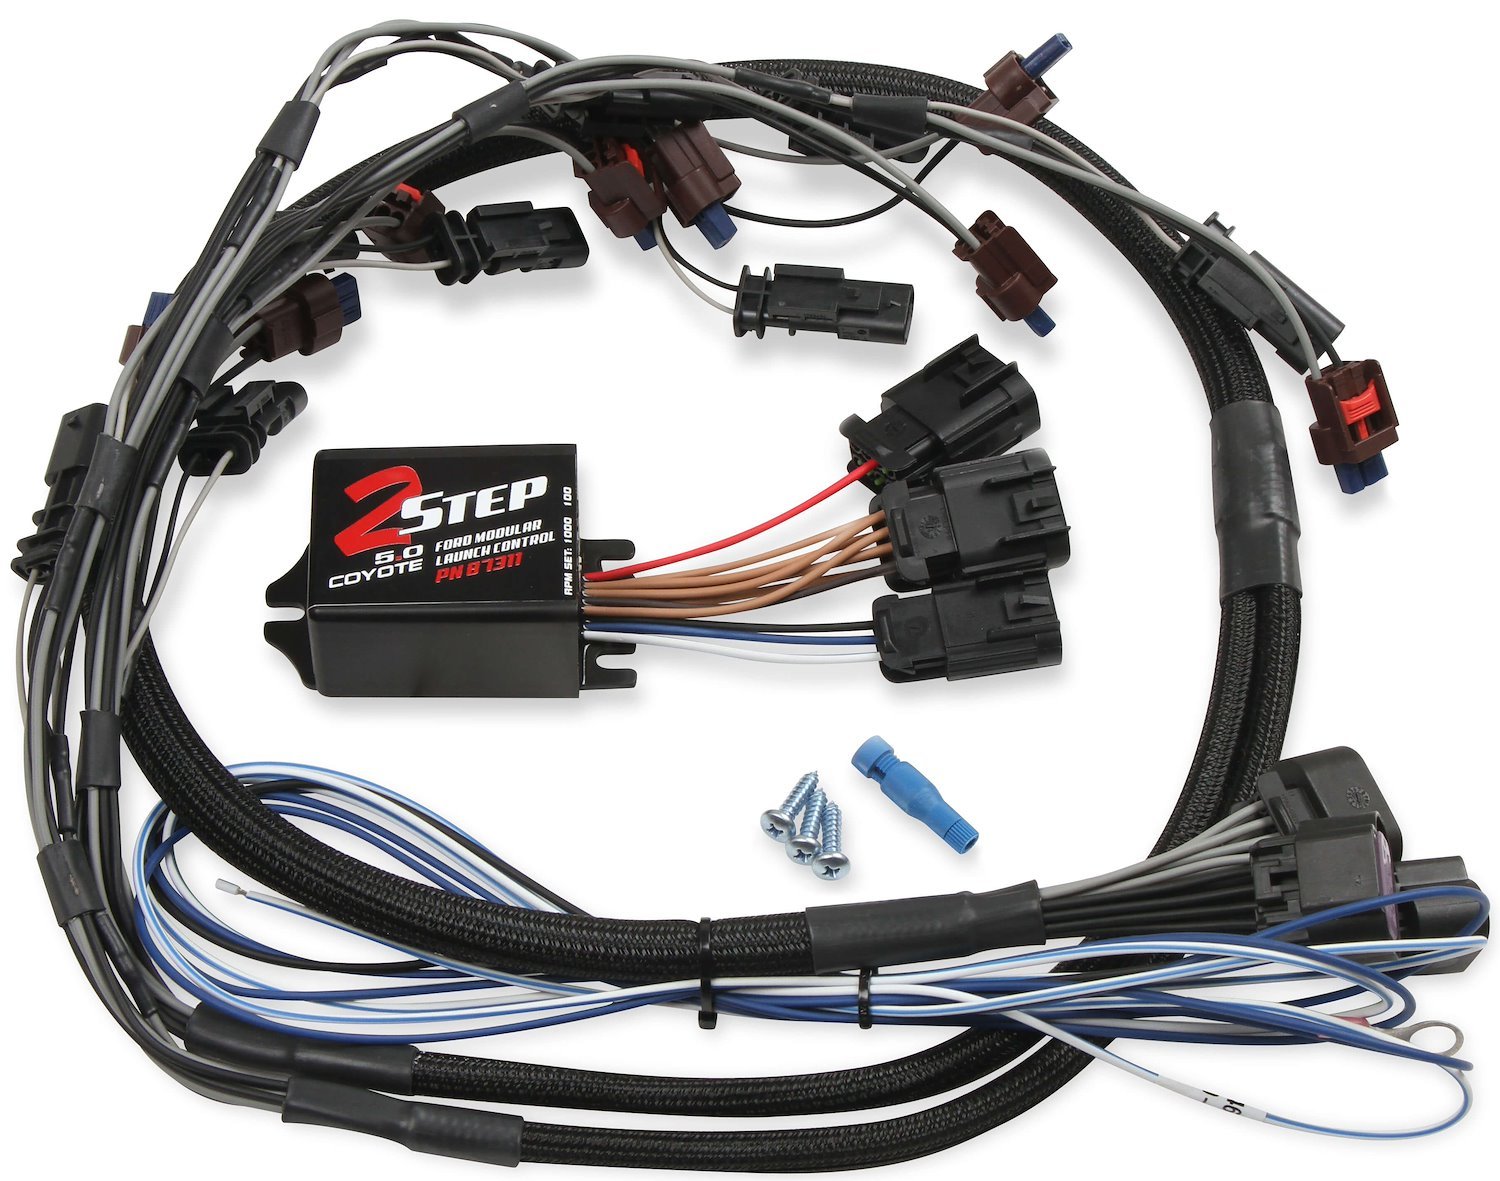 2-Step RPM Controller 2016-Up Ford Coyote 5.0L Motor